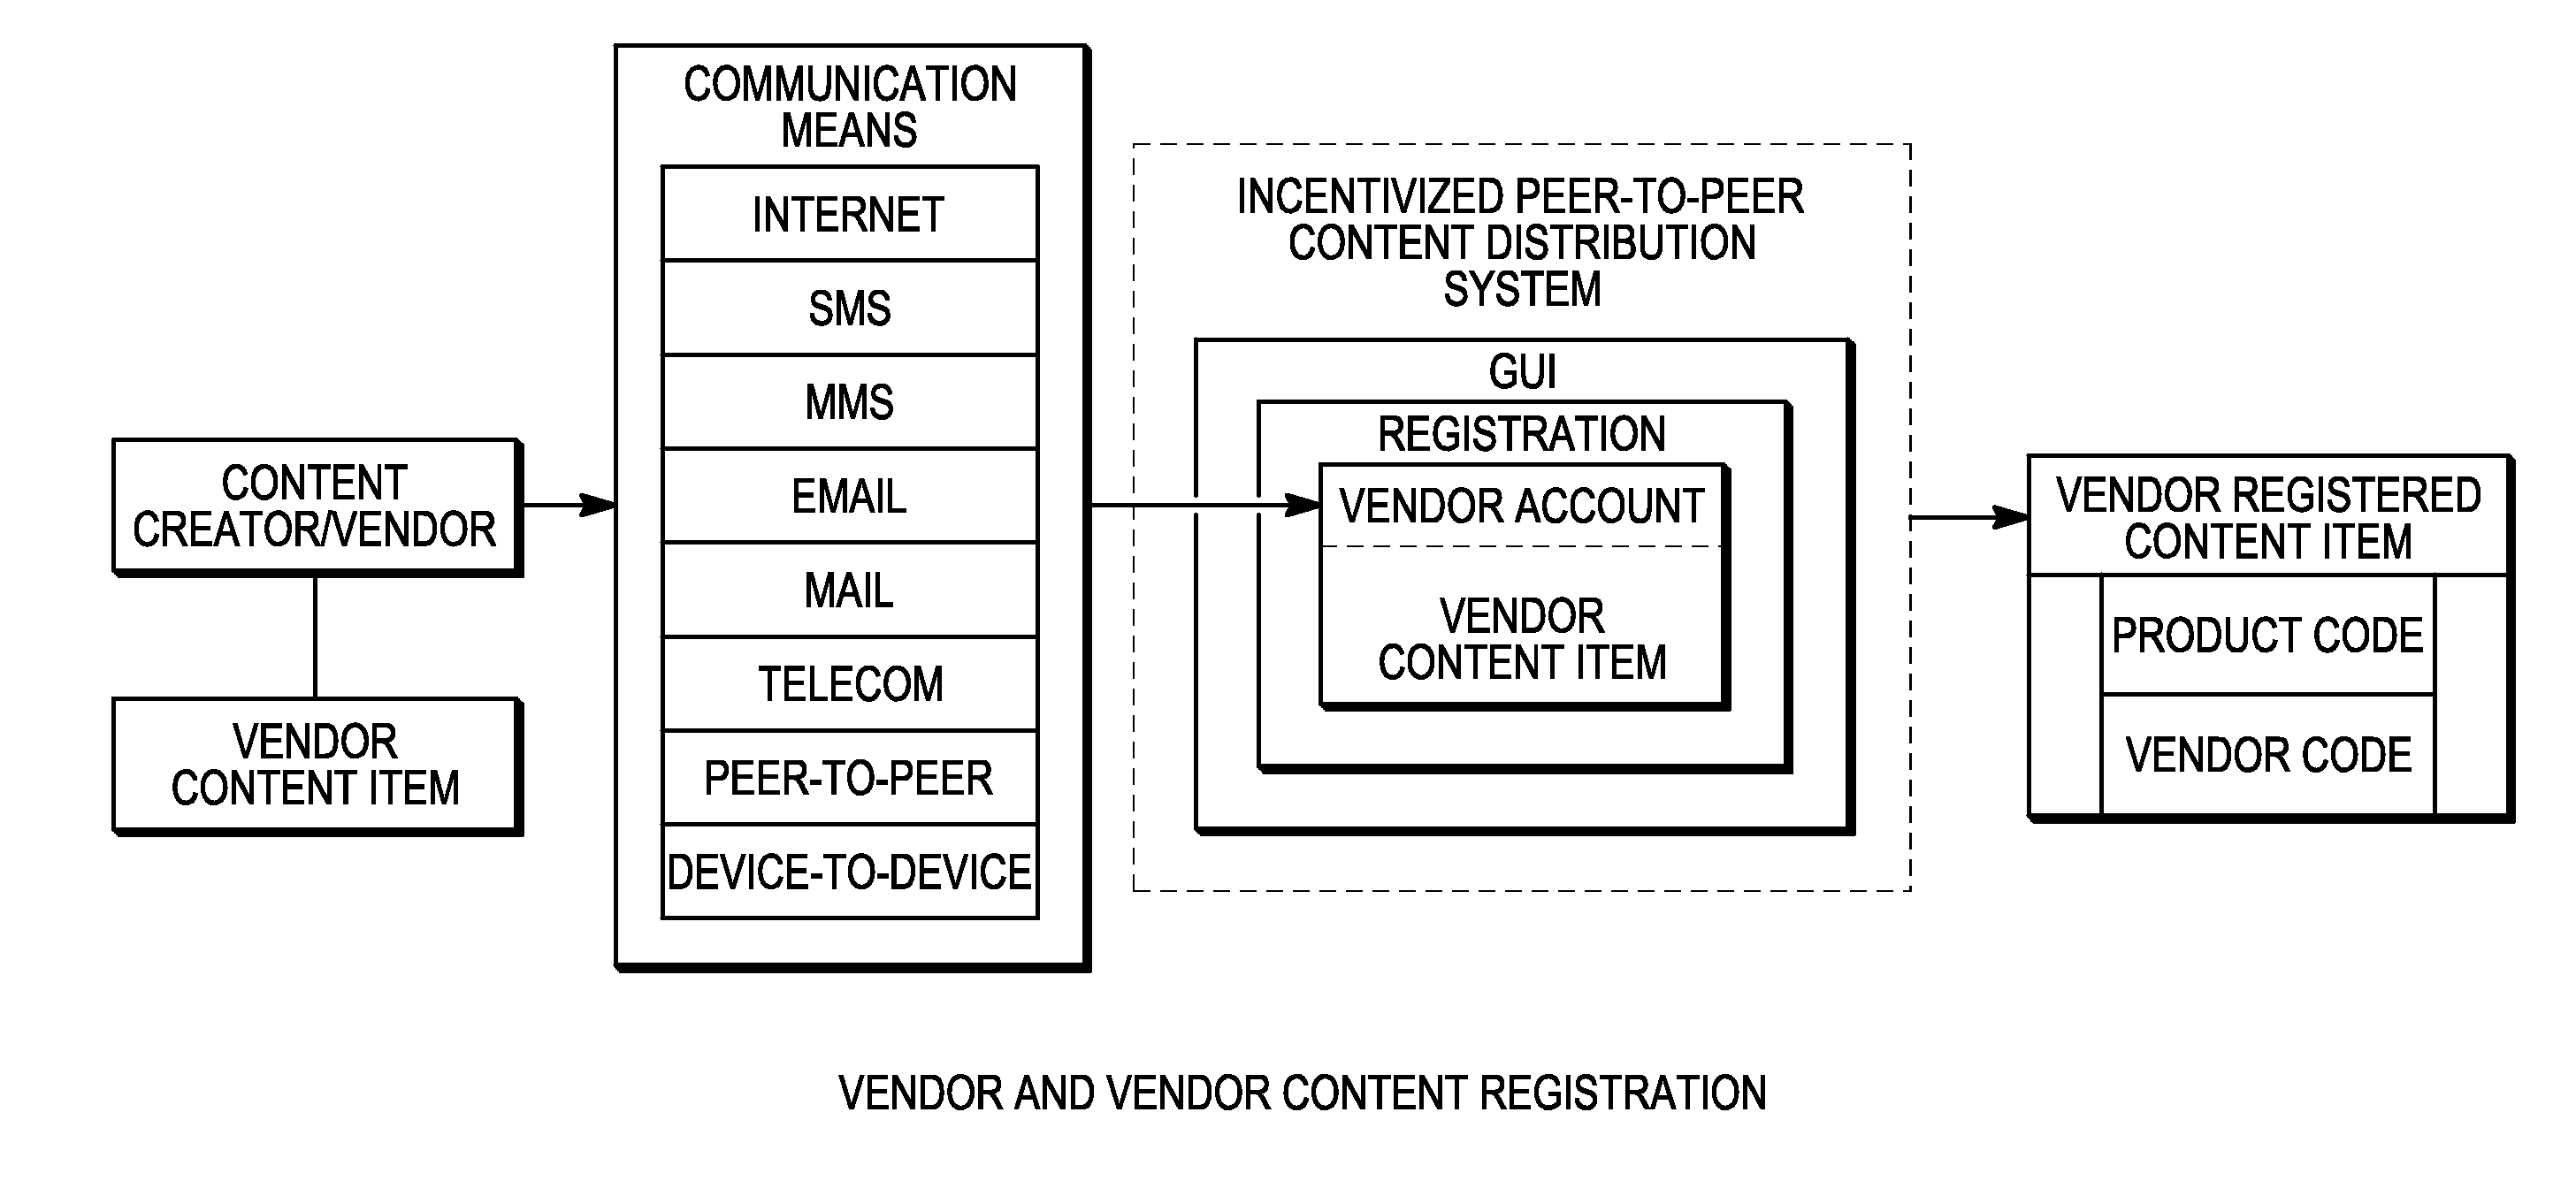 Incentivized peer-to-peer content and royalty distribution system